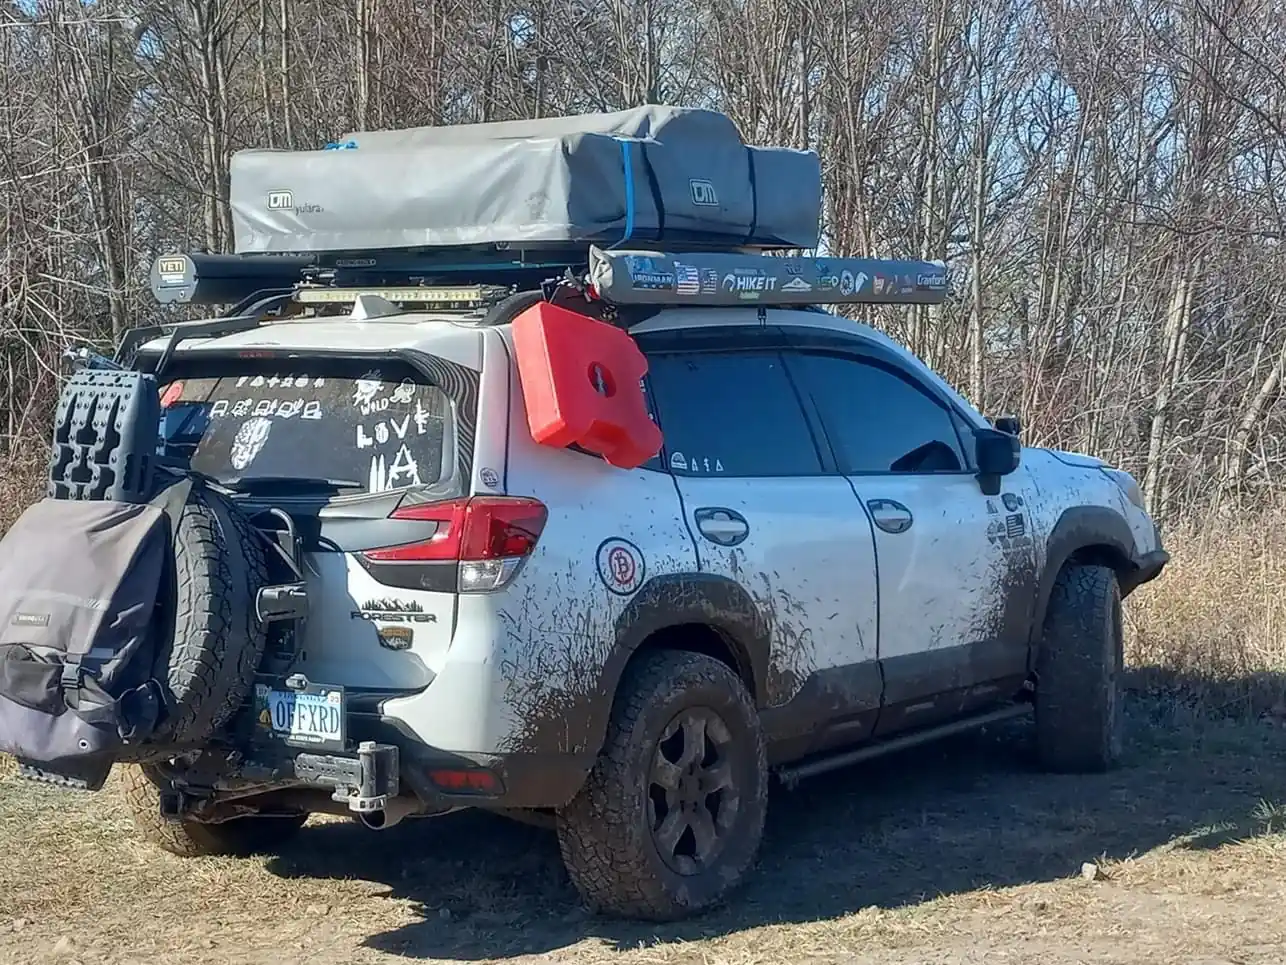 subaru forester offroad modified with overlanding gear